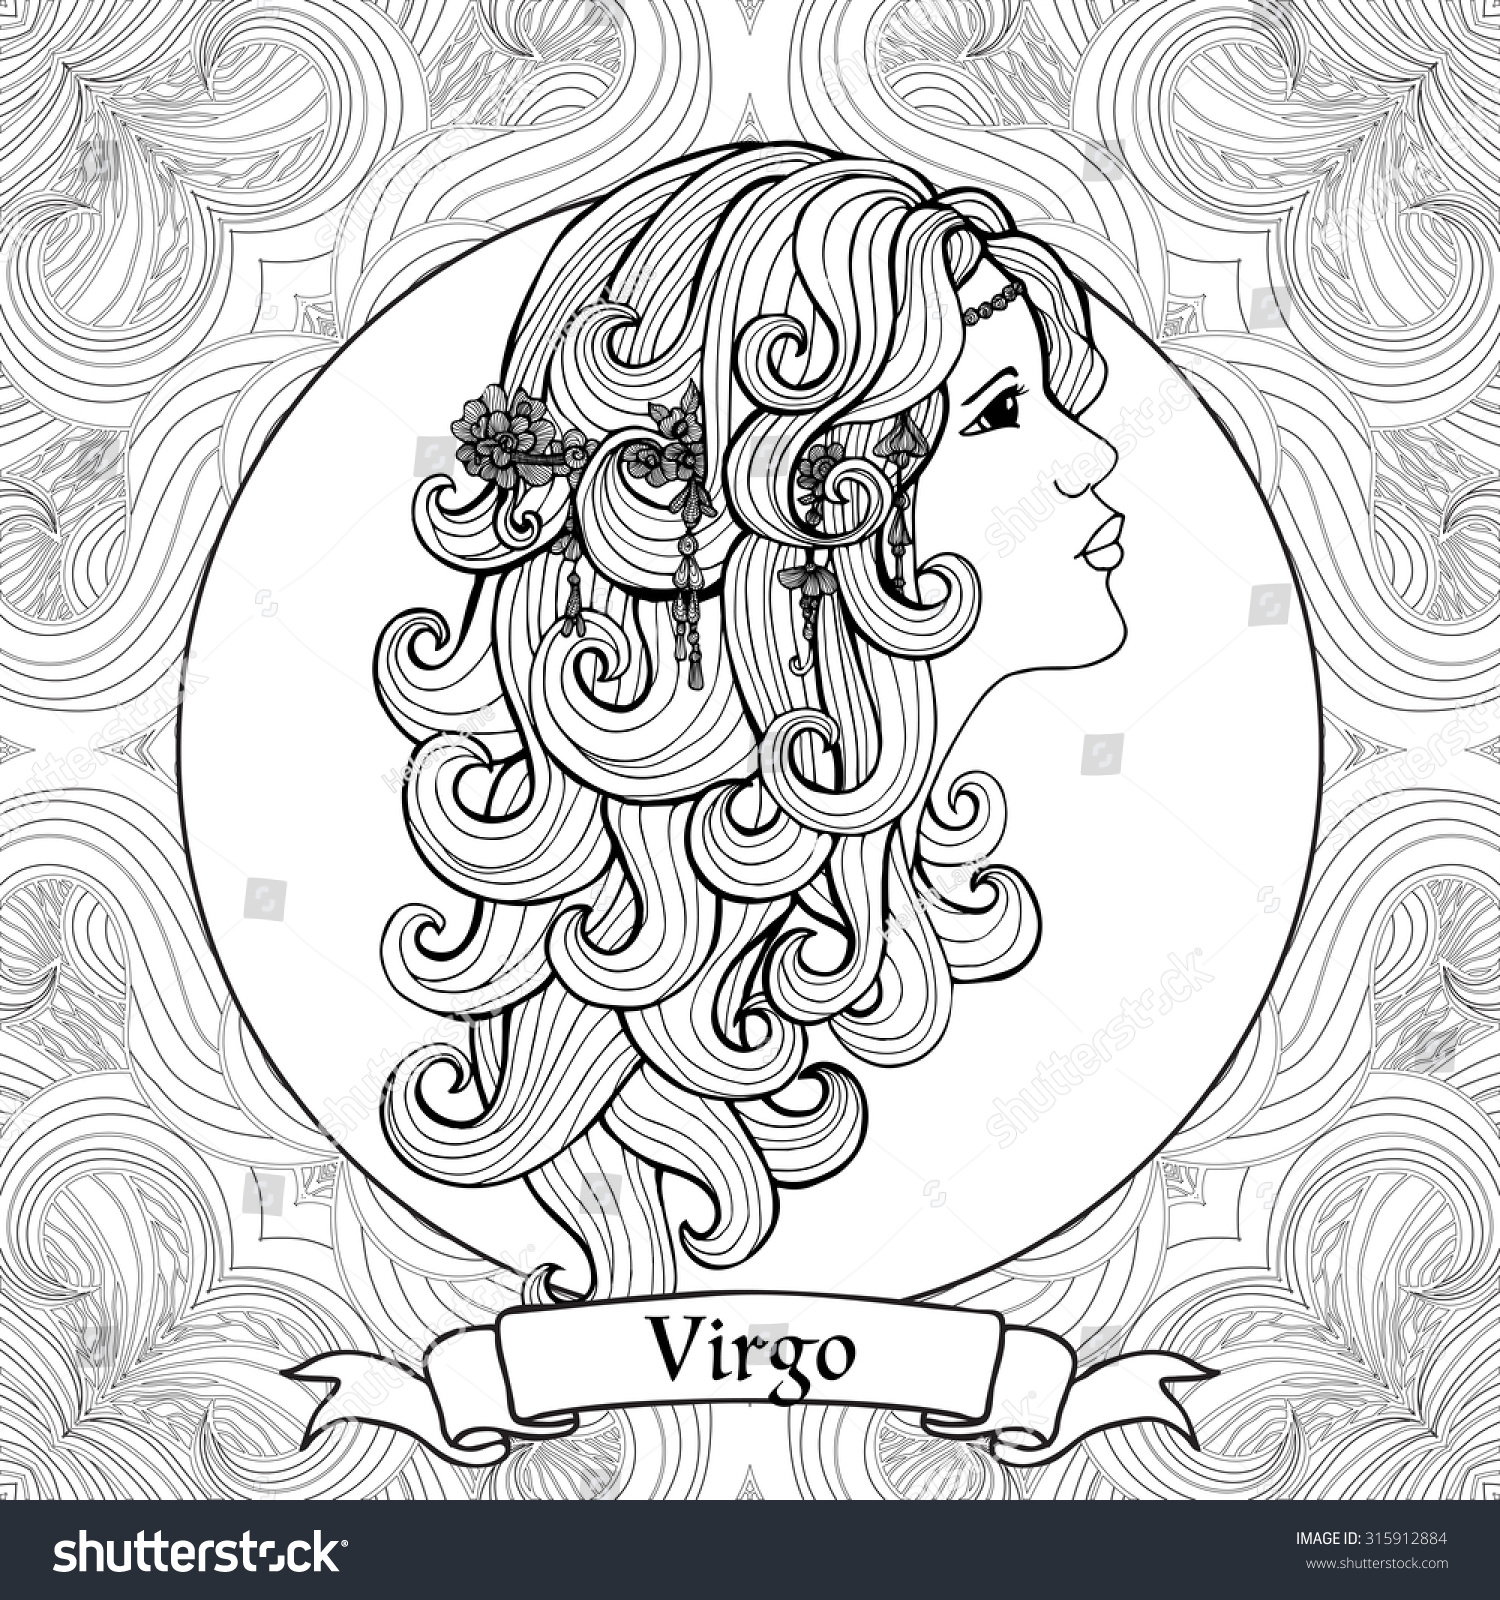 Download Coloring Page Pattern Zodiac Sign Virgo Stock Vector 315912884 - Shutterstock